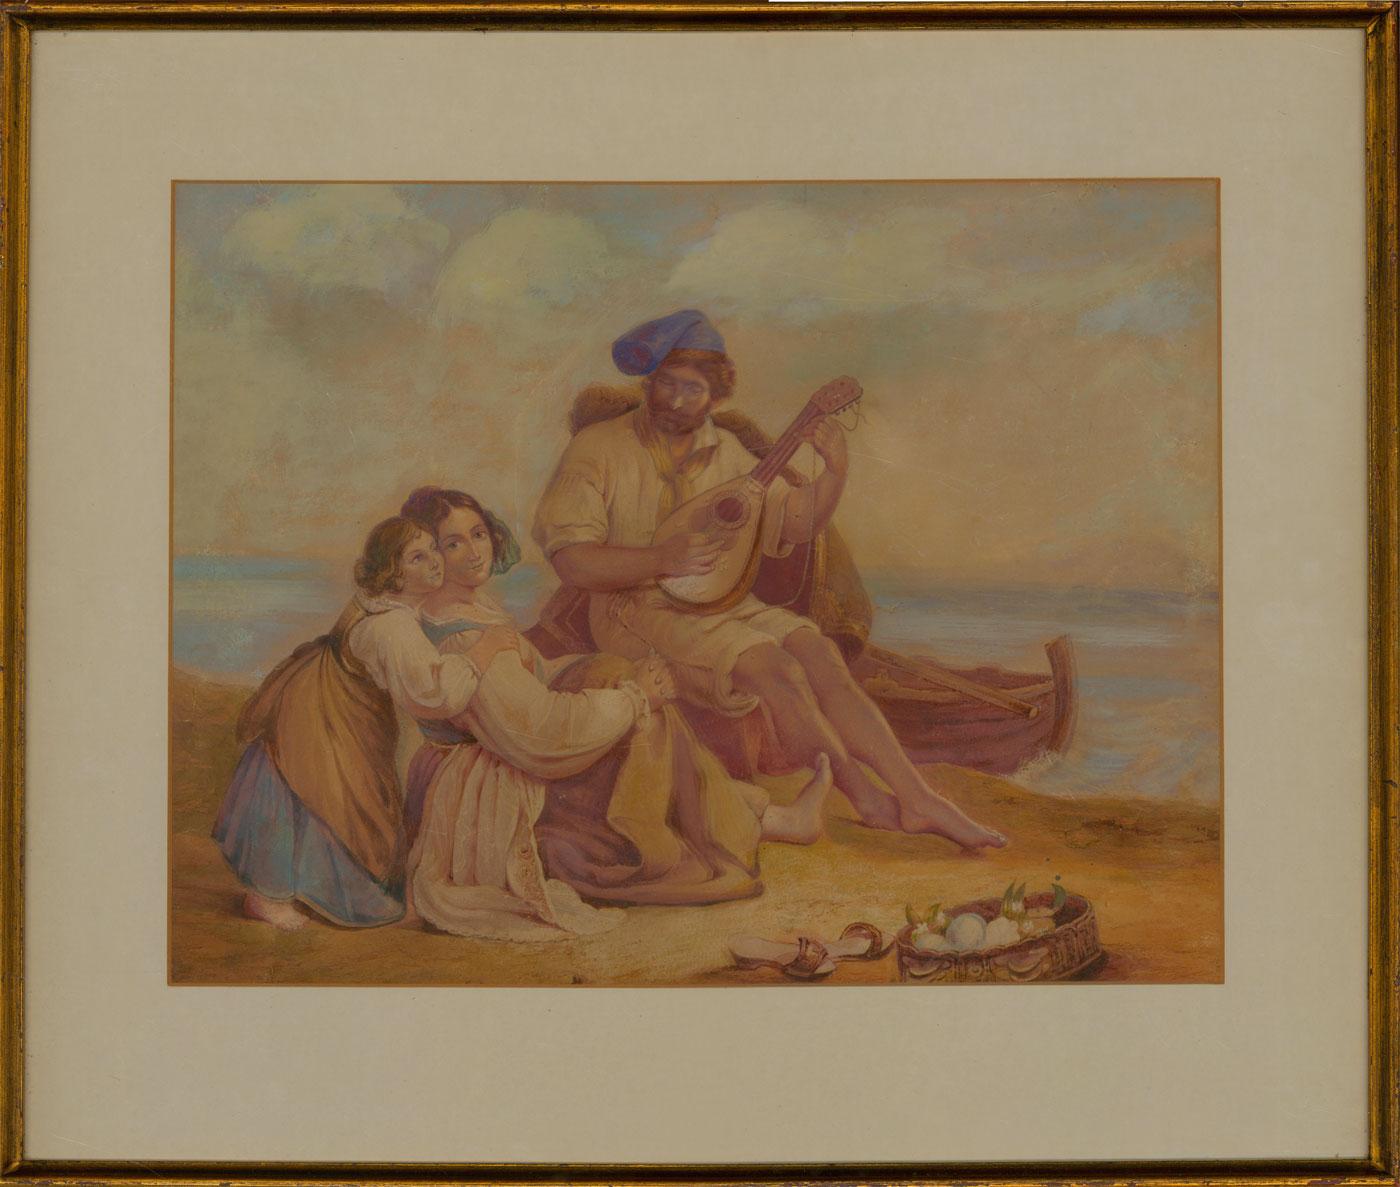 Unknown Figurative Art - 19th Century Watercolour - Figures on a Beach